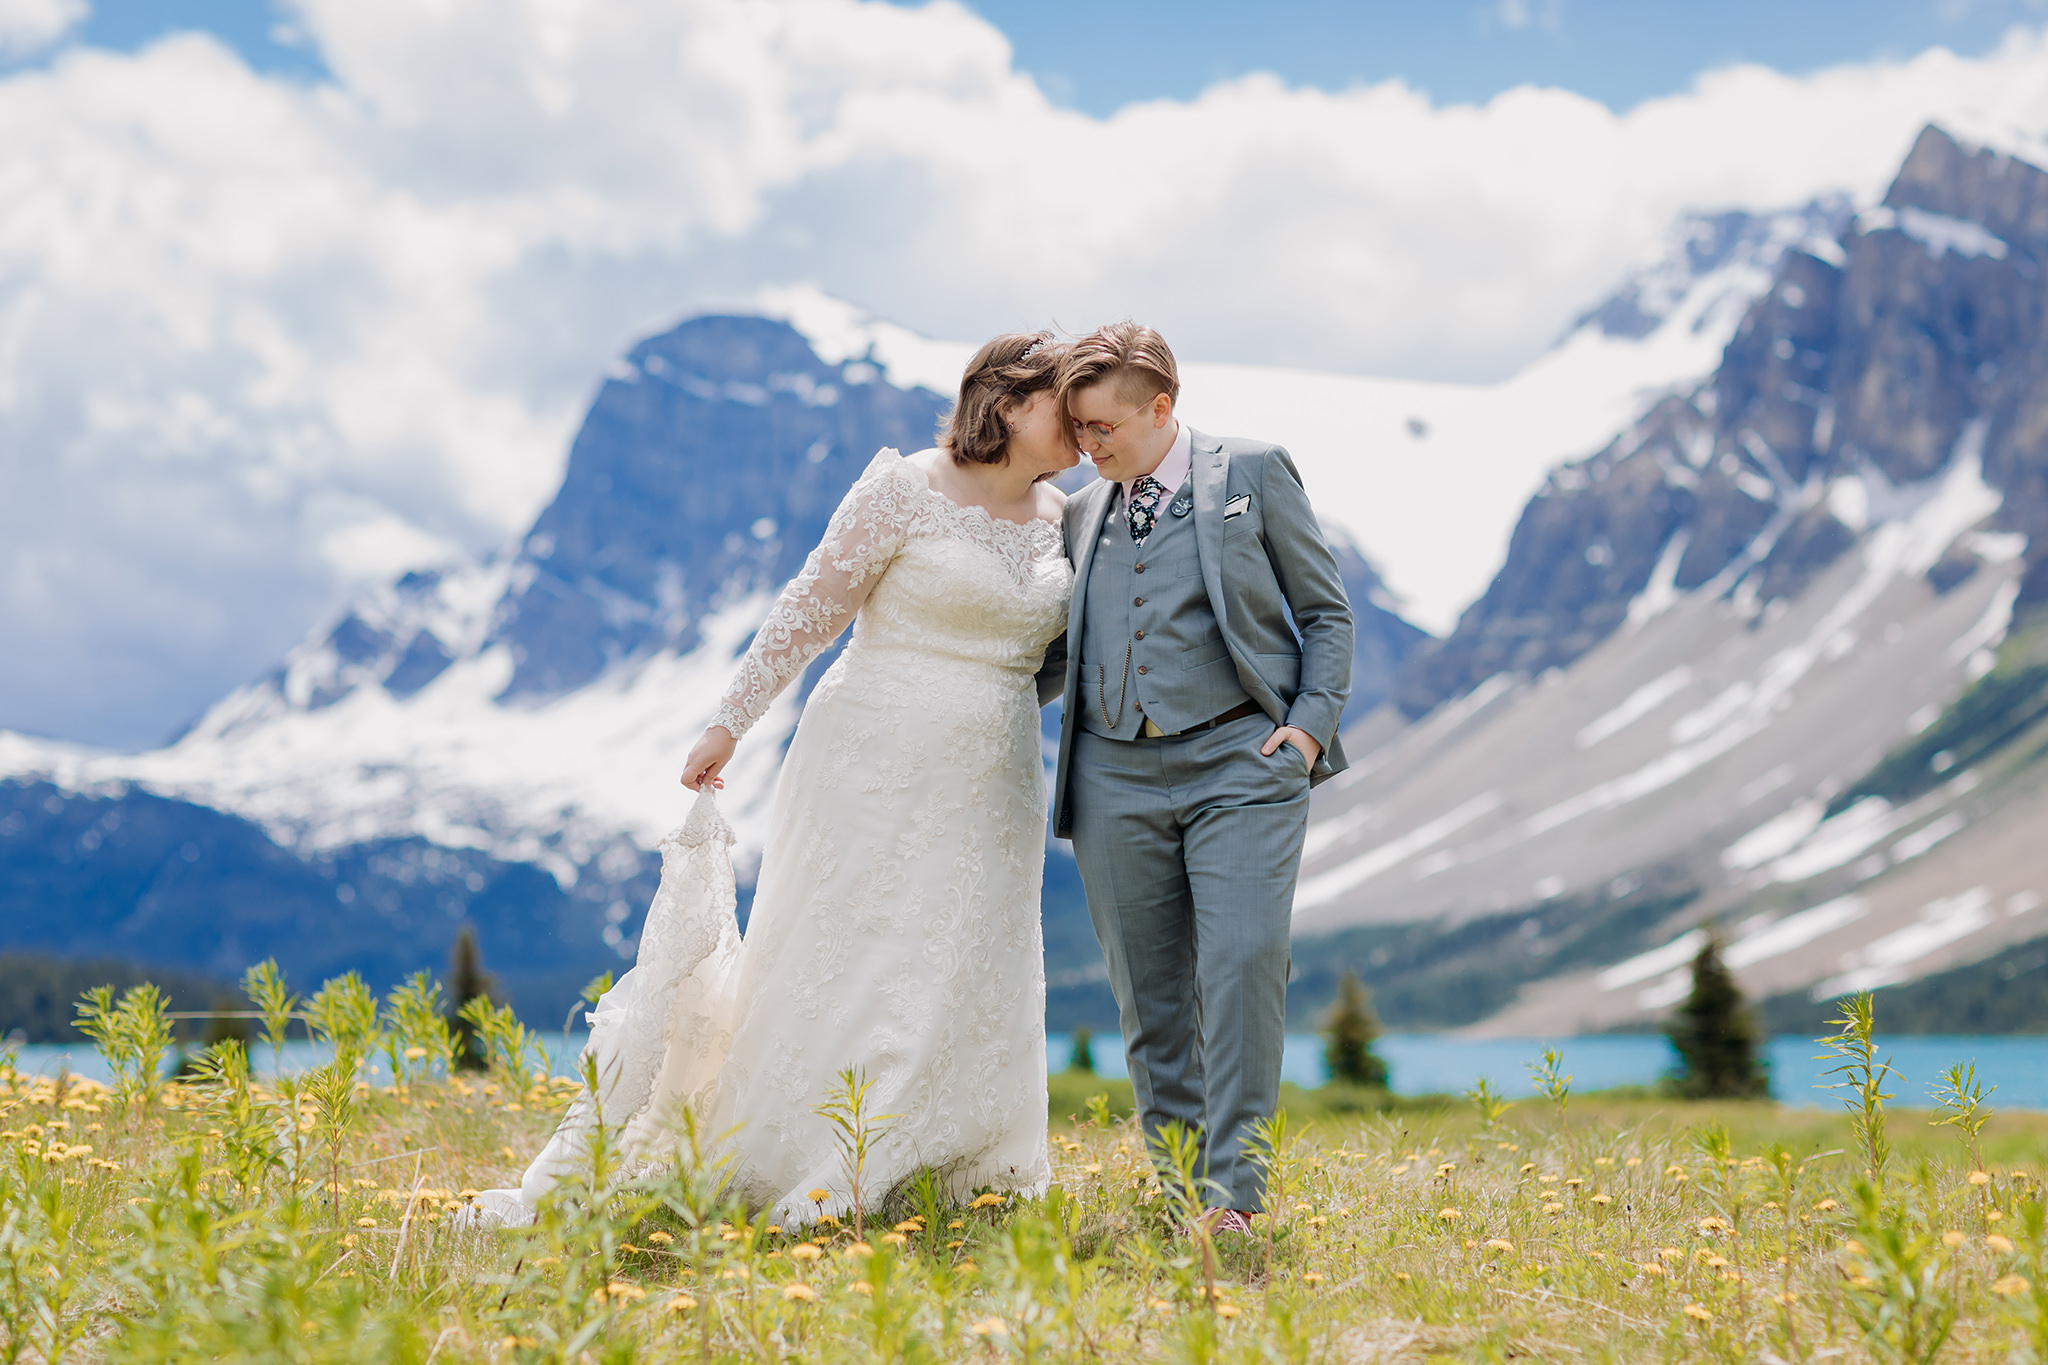 Post-wedding portraits in the meadow at Bow Lake. same-sex wedding. Mountain Wedding portraits photographed by ENV Photography. Gay friendly. LGBTQ friendly wedding & elopement photographer.